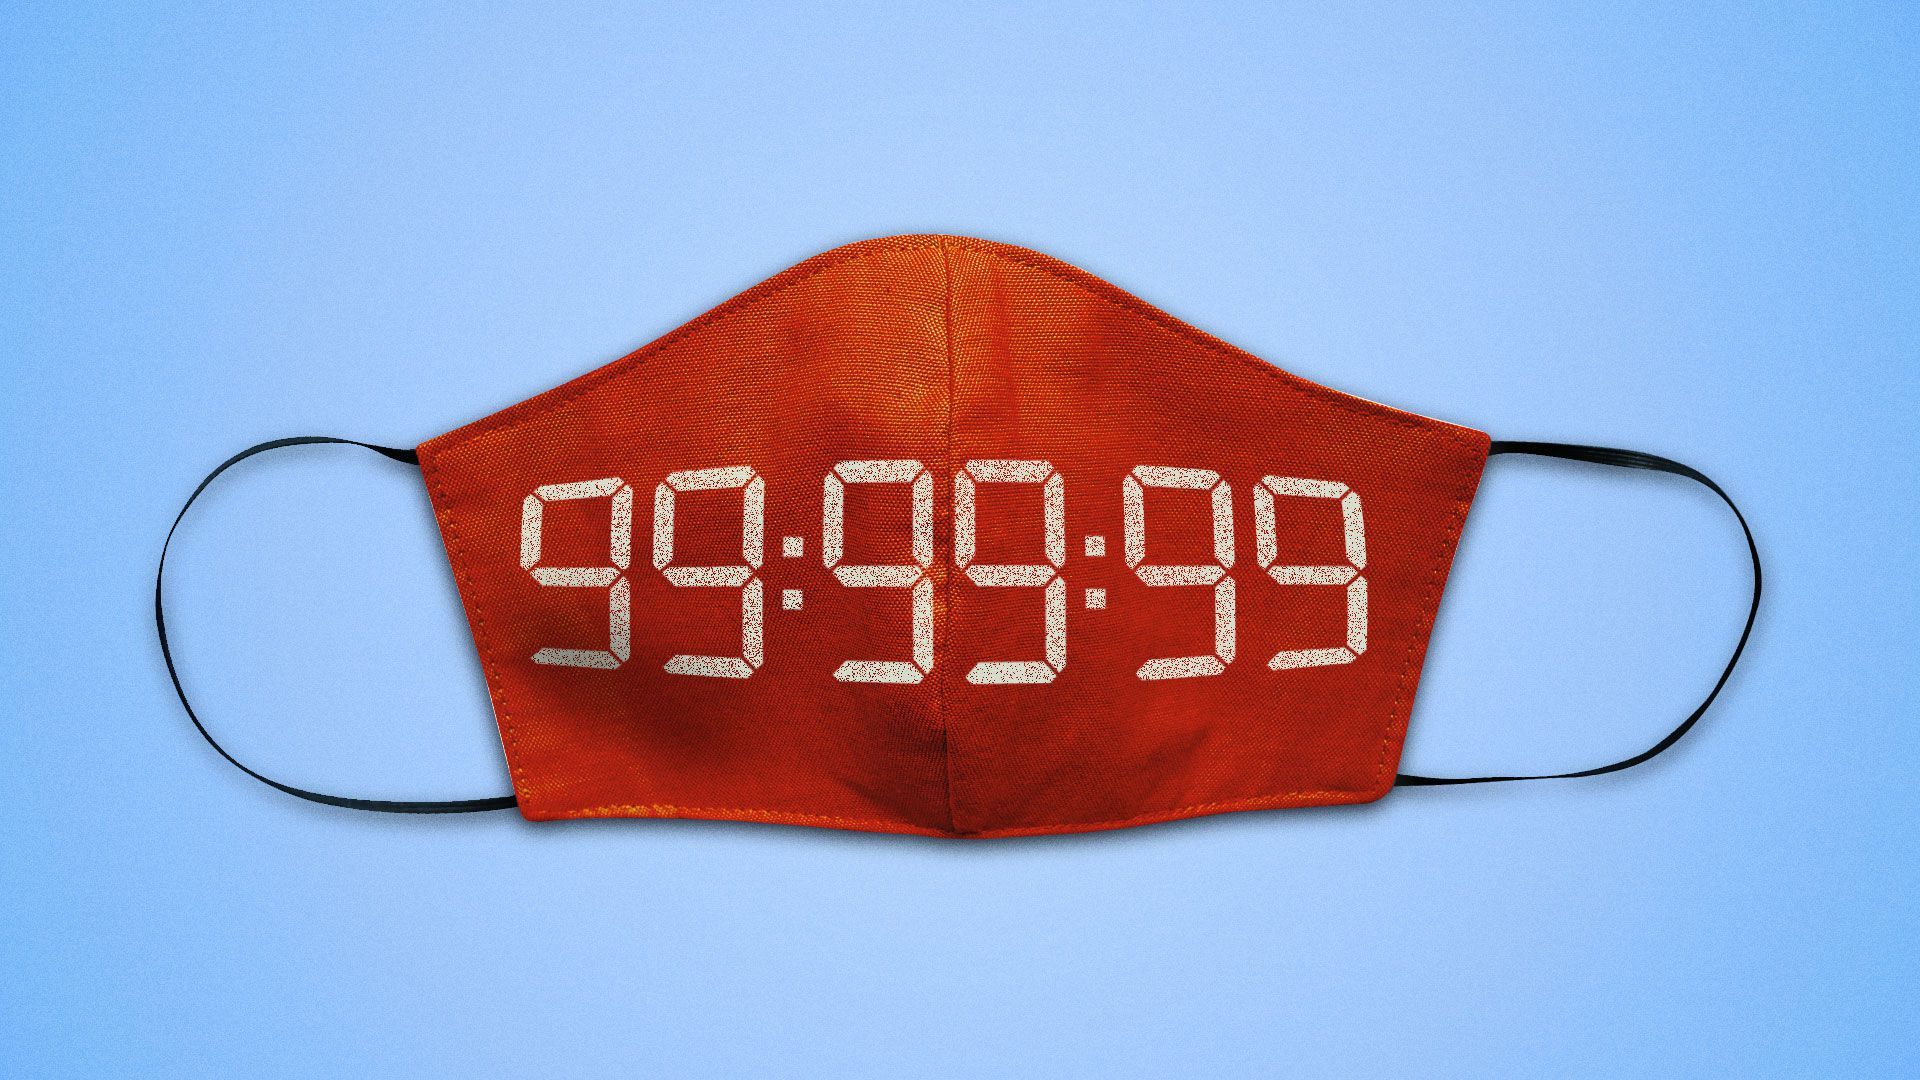 Illustration of a face mask with an alarm clock set to 99:99:99